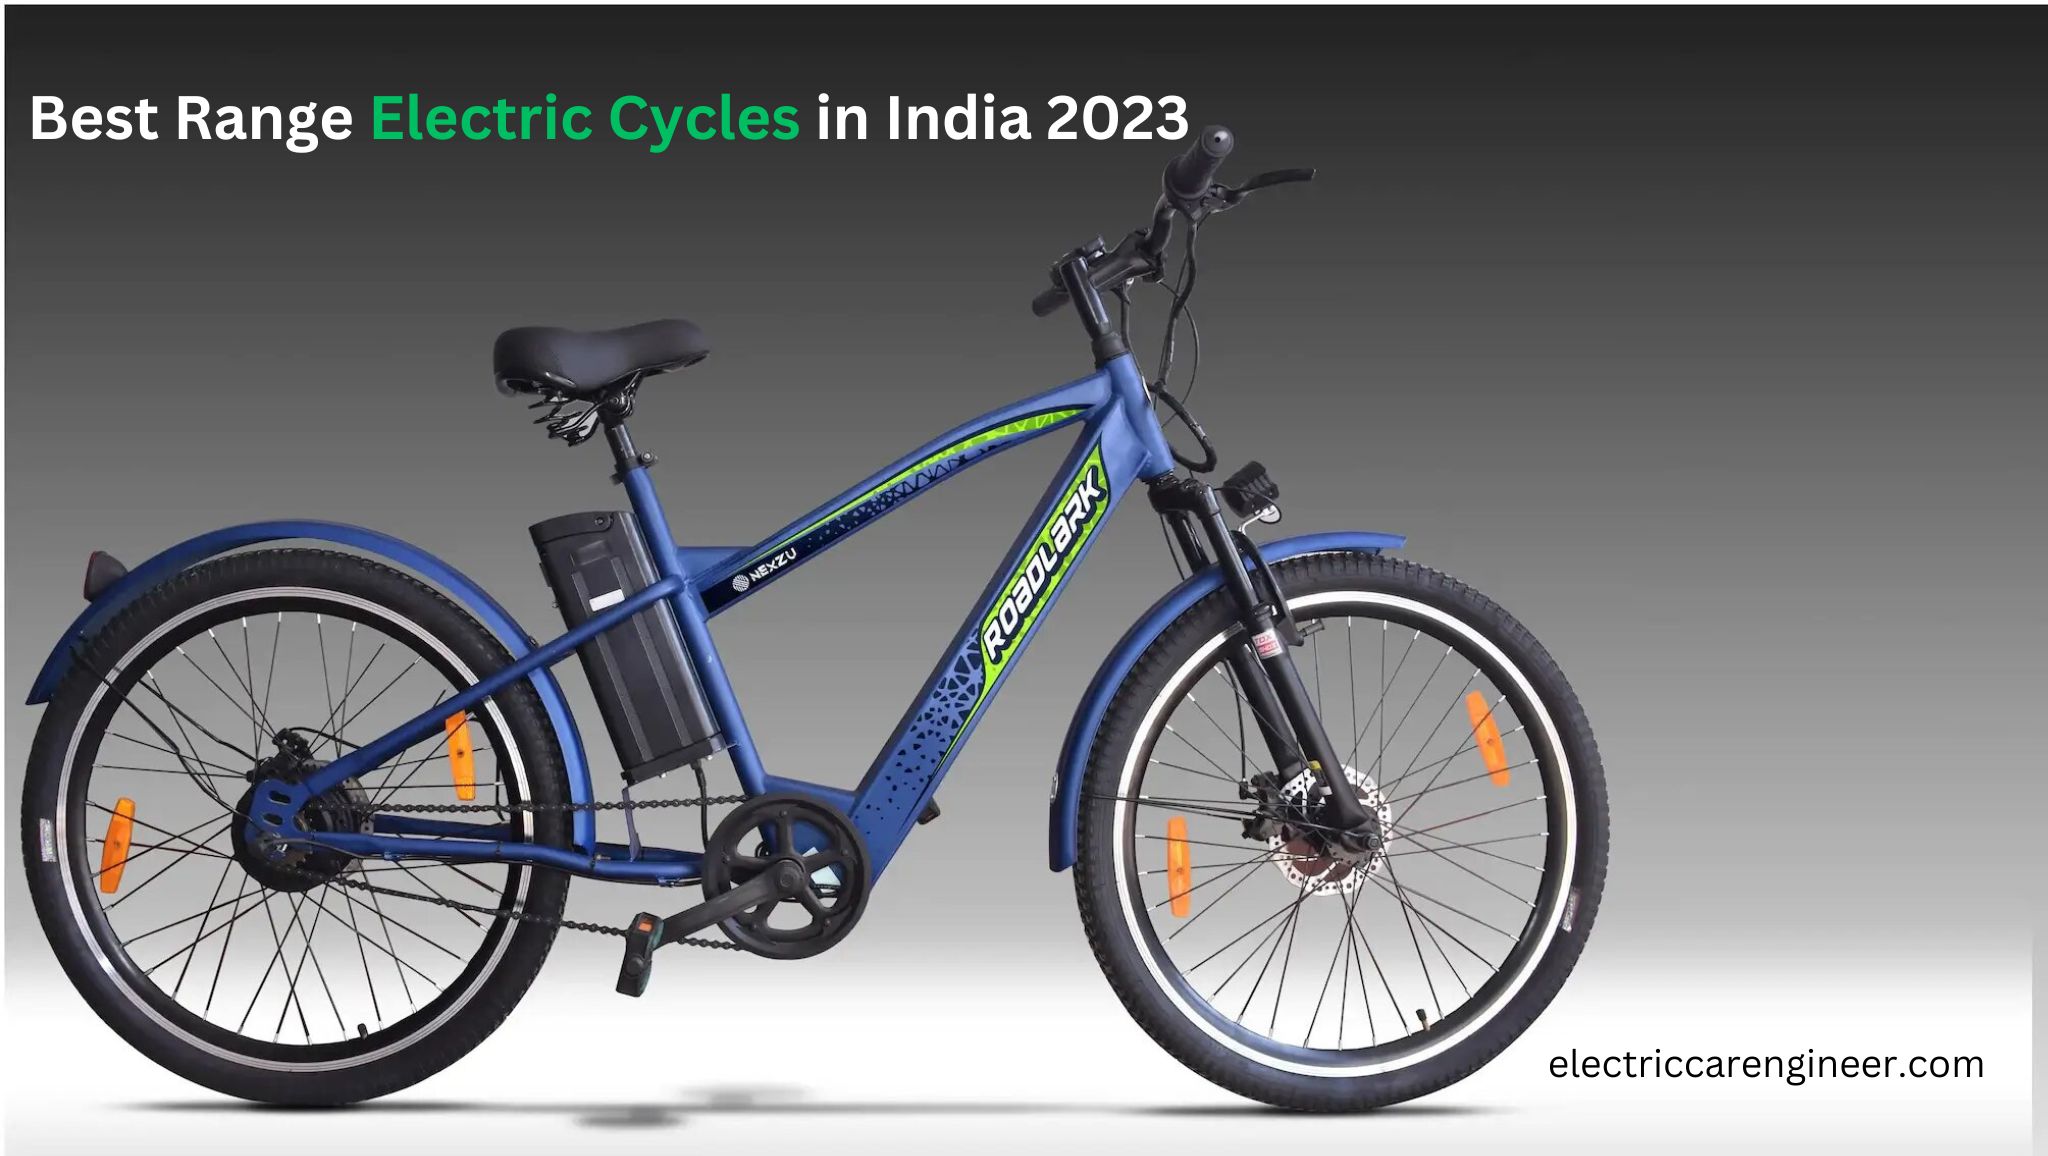 Best Range Electric Cycles in India 2023